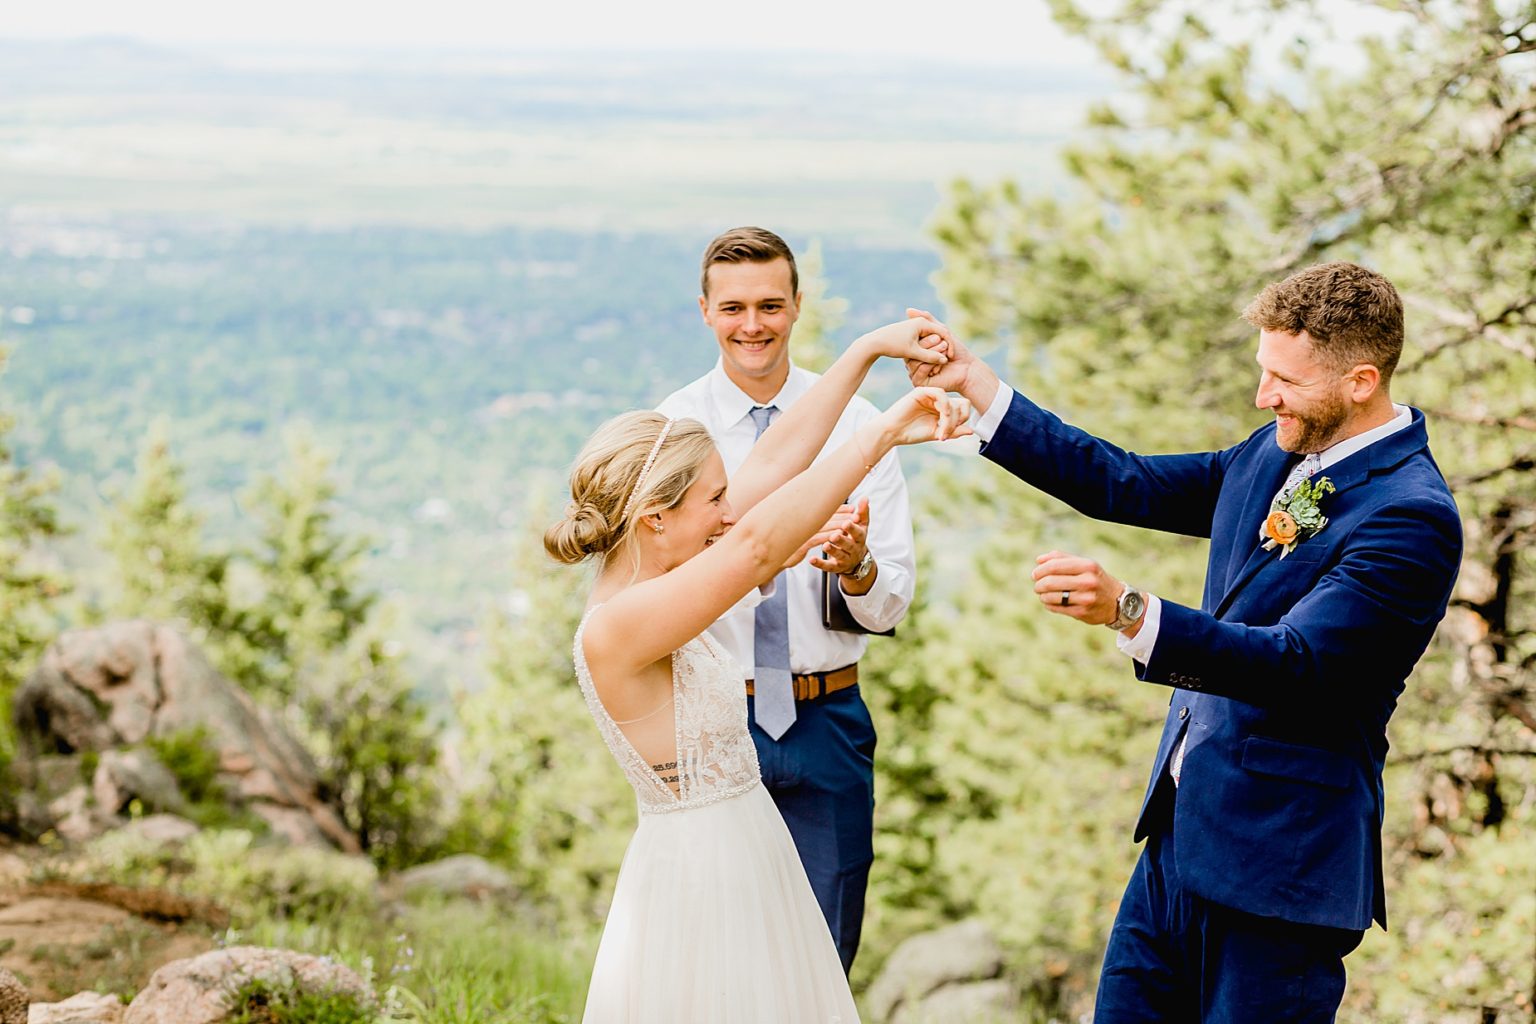 bride and groom celebrate being officially married by throwing hands in the air